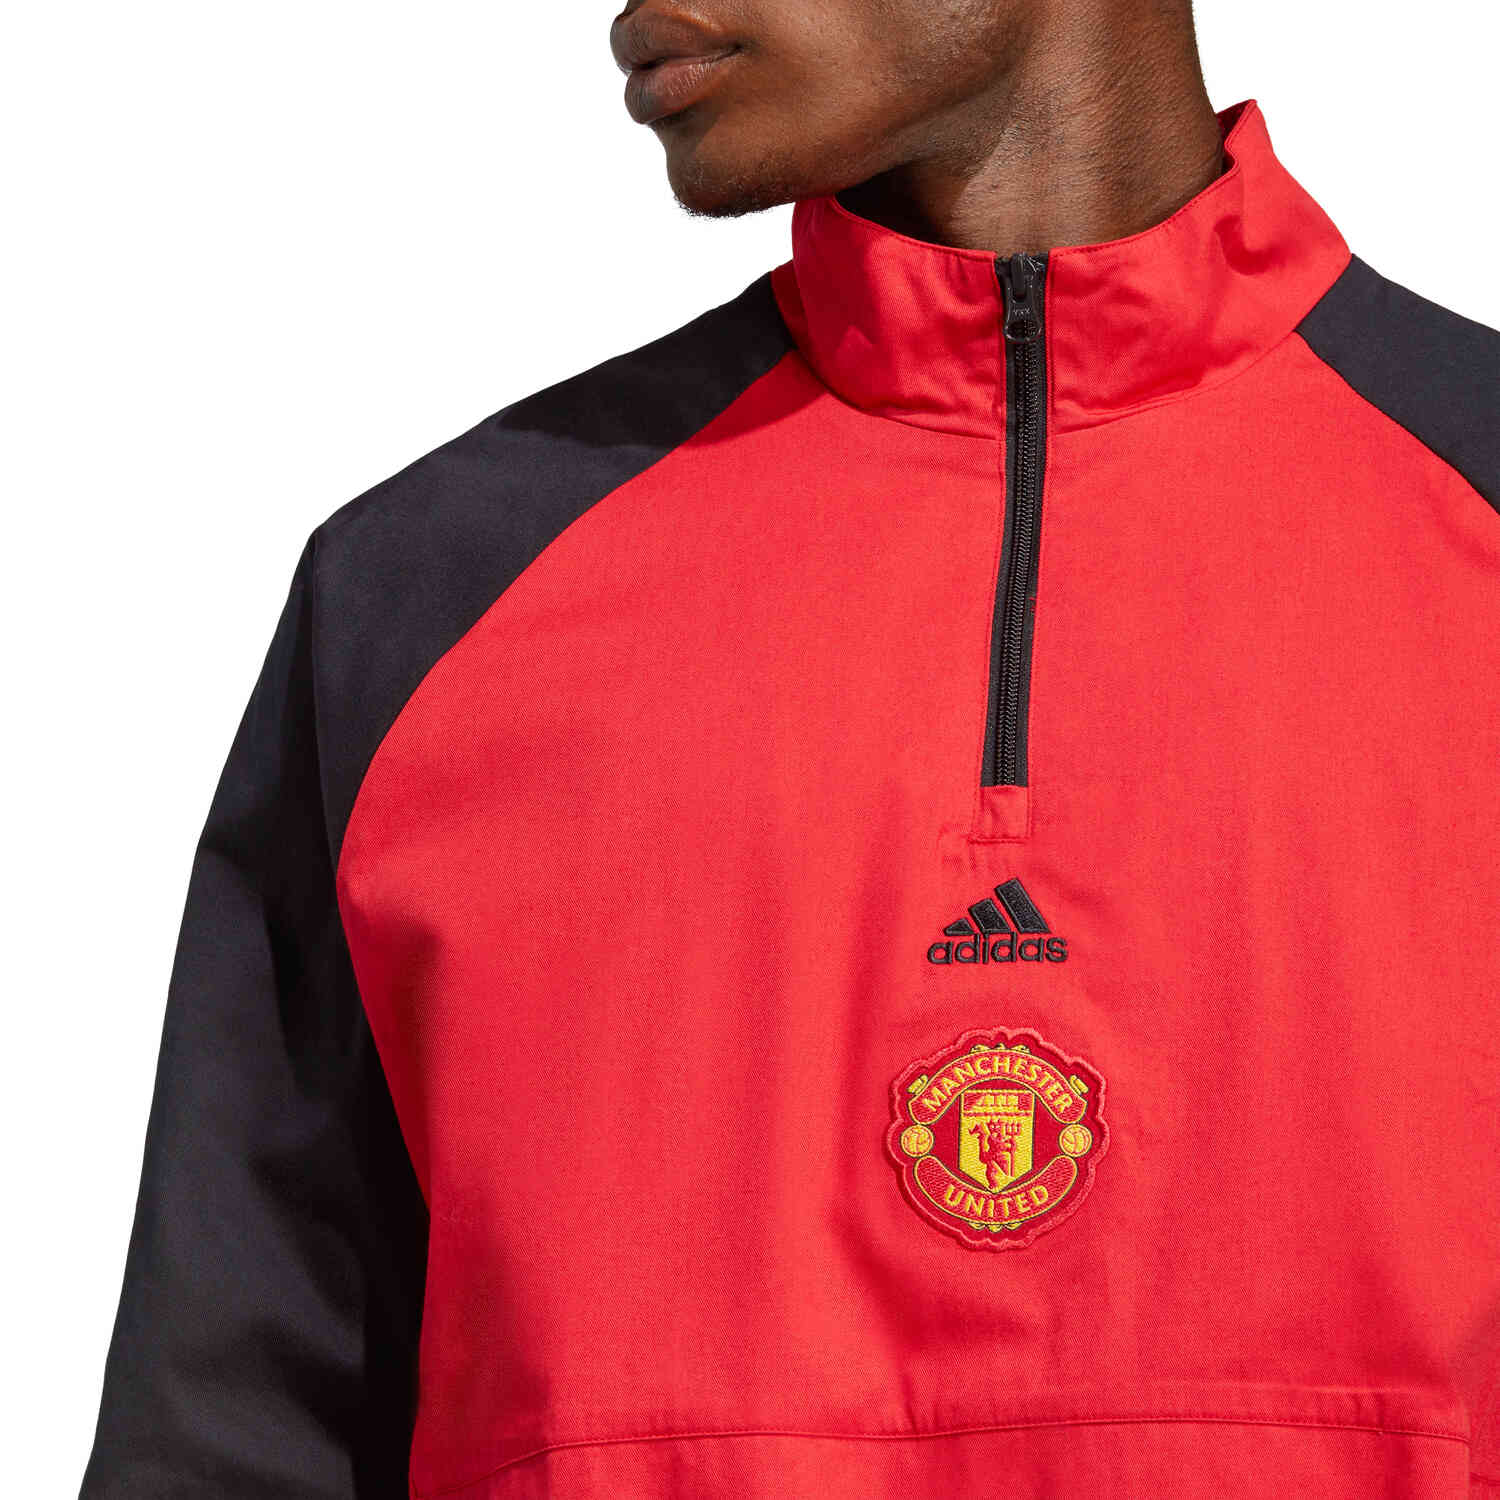 adidas Manchester United Icons Top – Mufc Red/Black